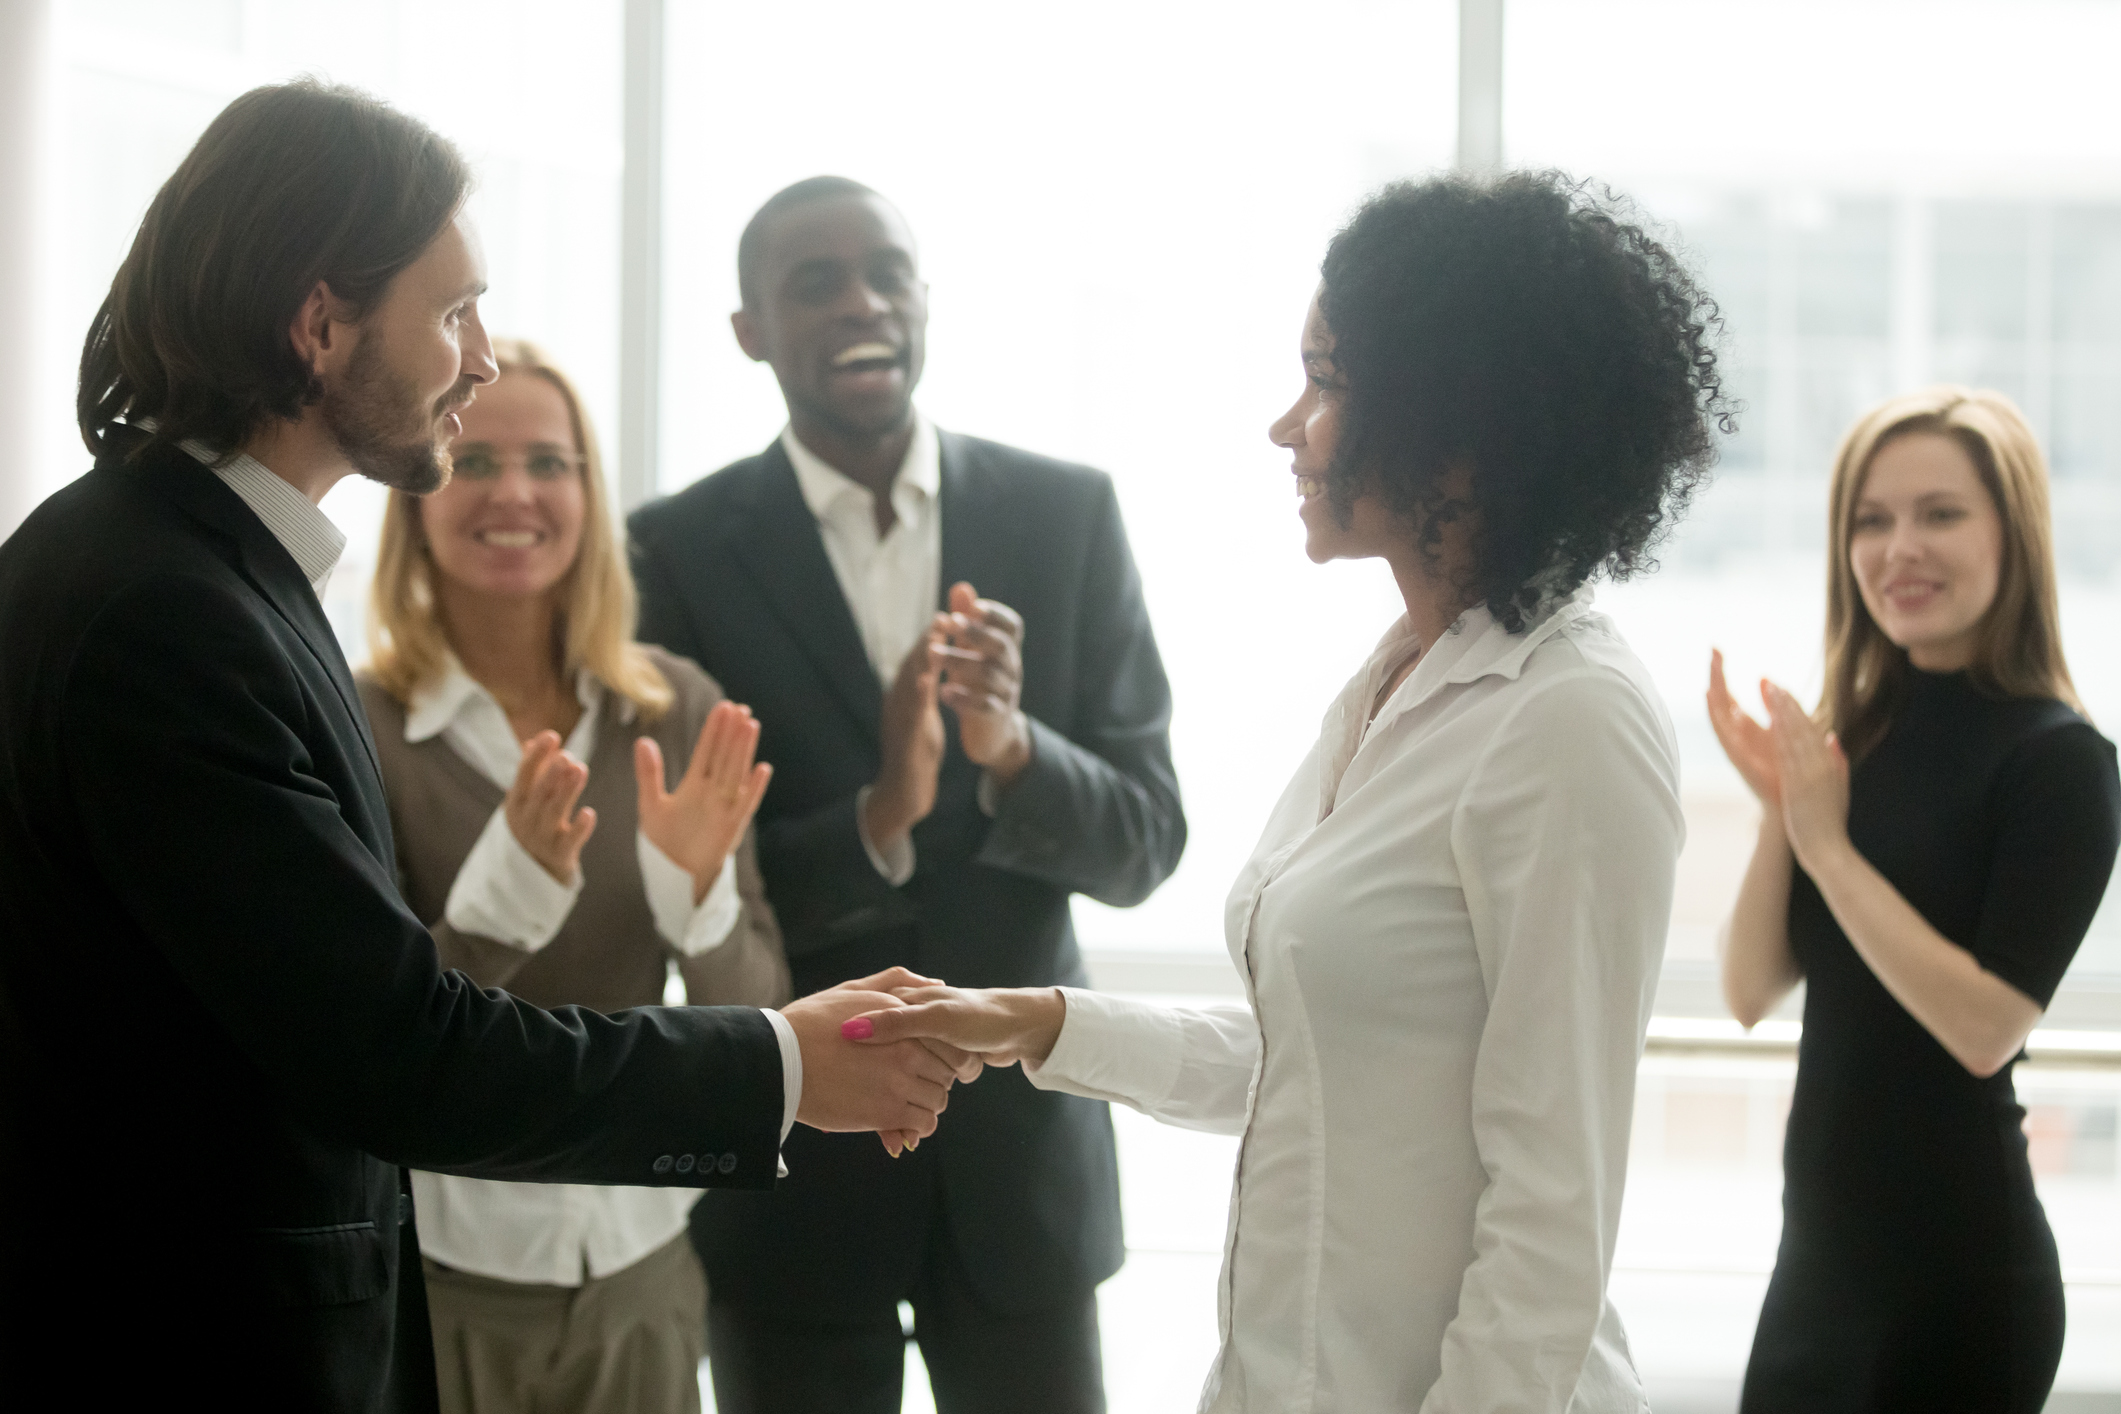 Incentive-based recognition strategies are tangible ways to bring the companys culture to life and improve employee satisf